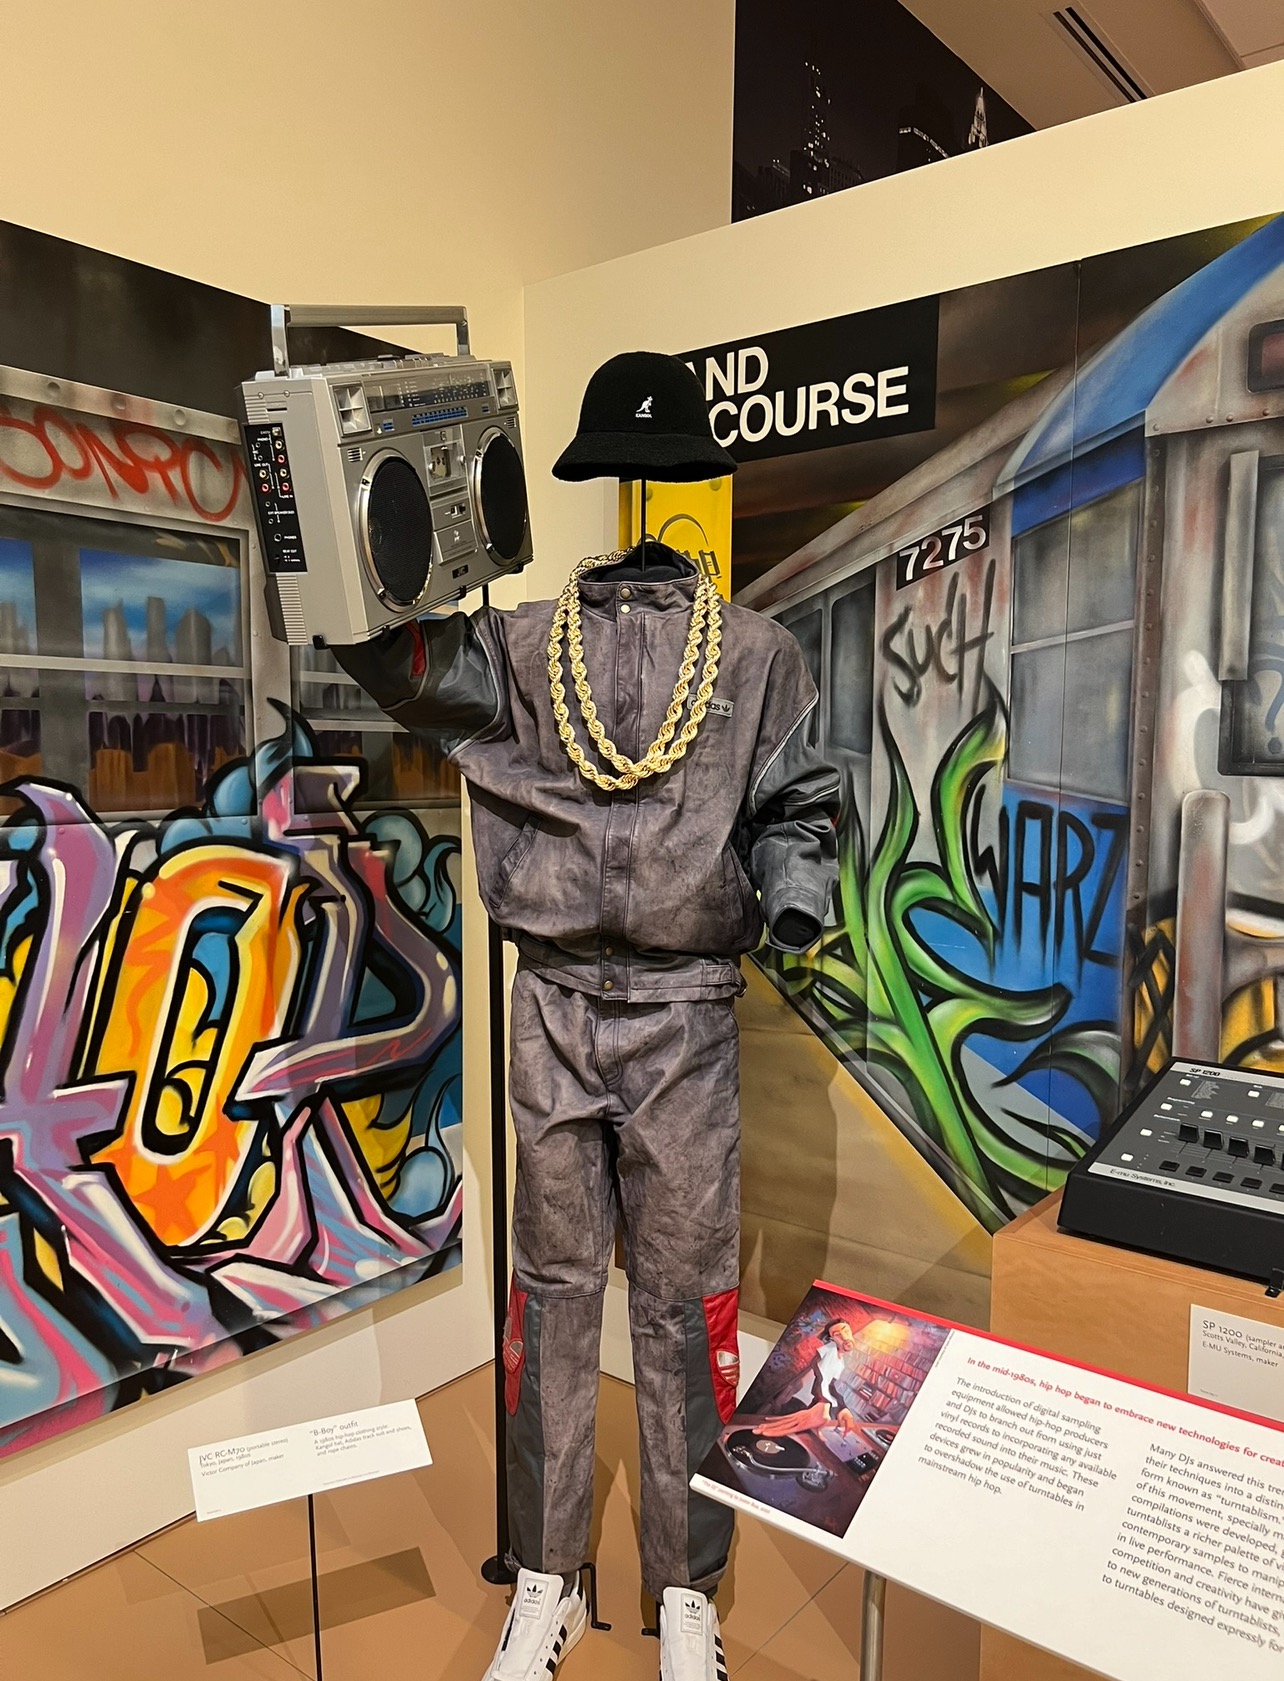 alt txt = "Grey hip hop outfit and NY style graffiti at the Musical Instrument Museum in Phoenix."